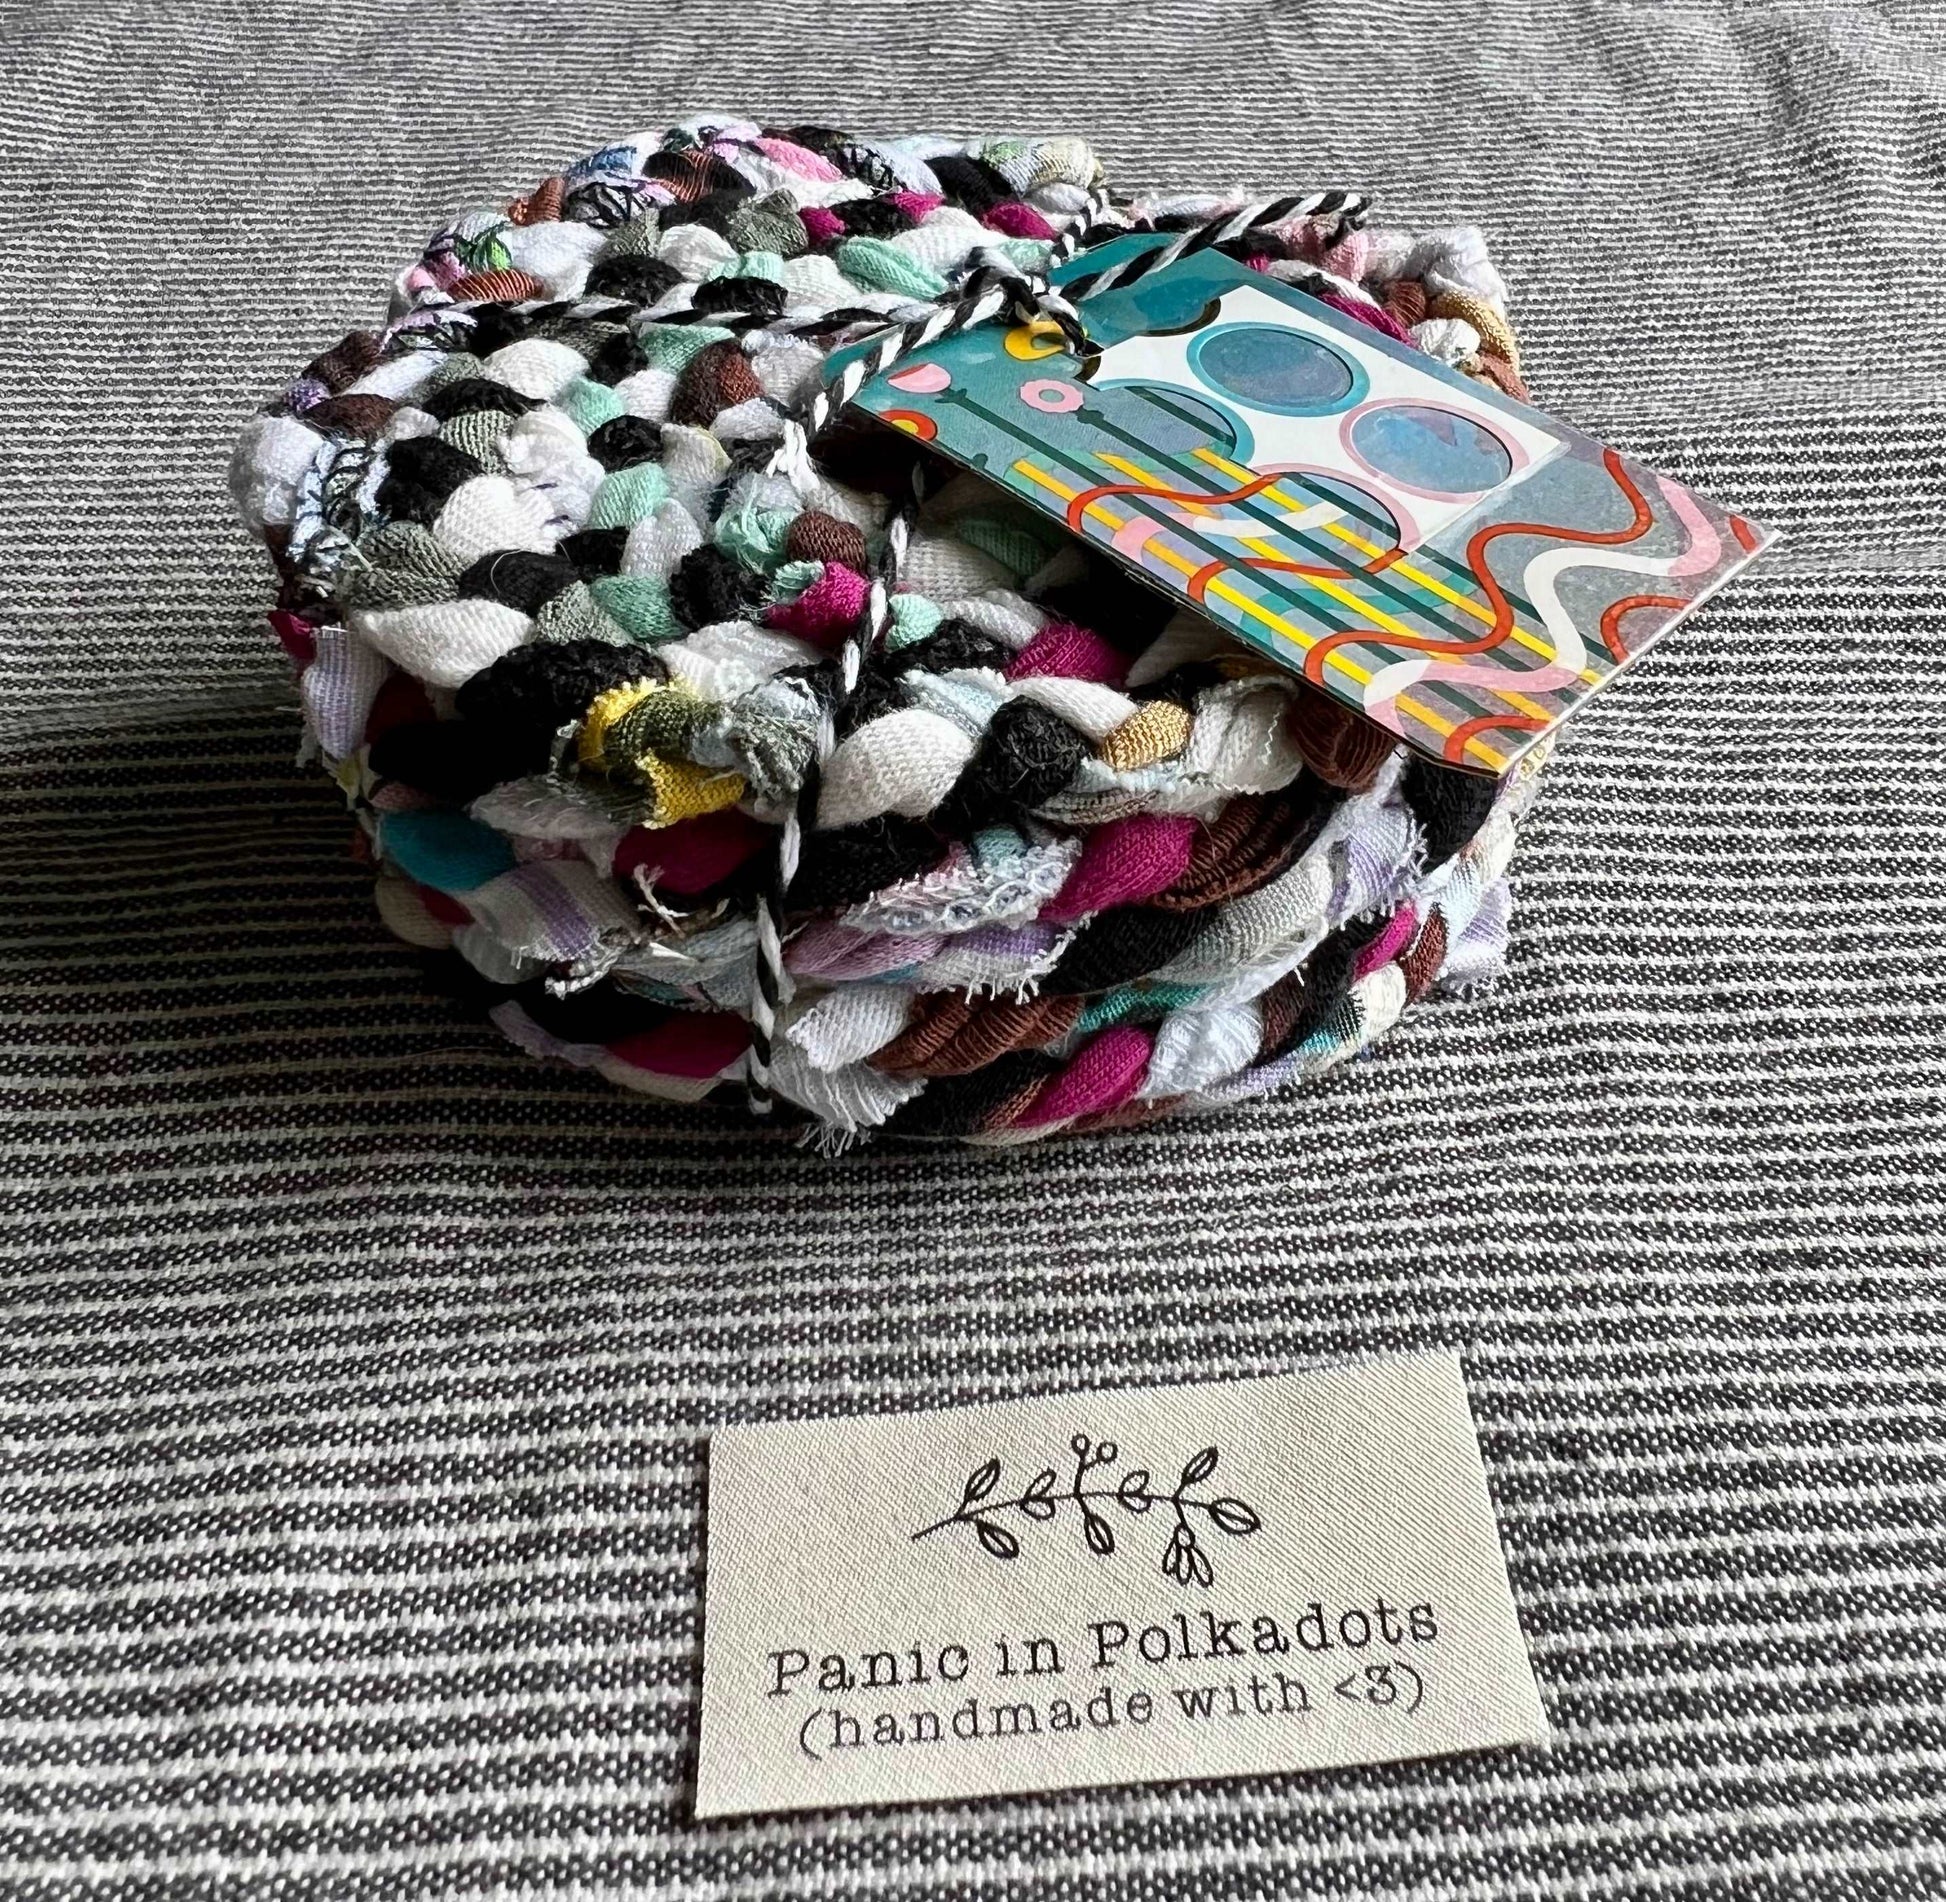 A set of six coasters, bound by string in a stack, with a Panic in Polkadots label in front